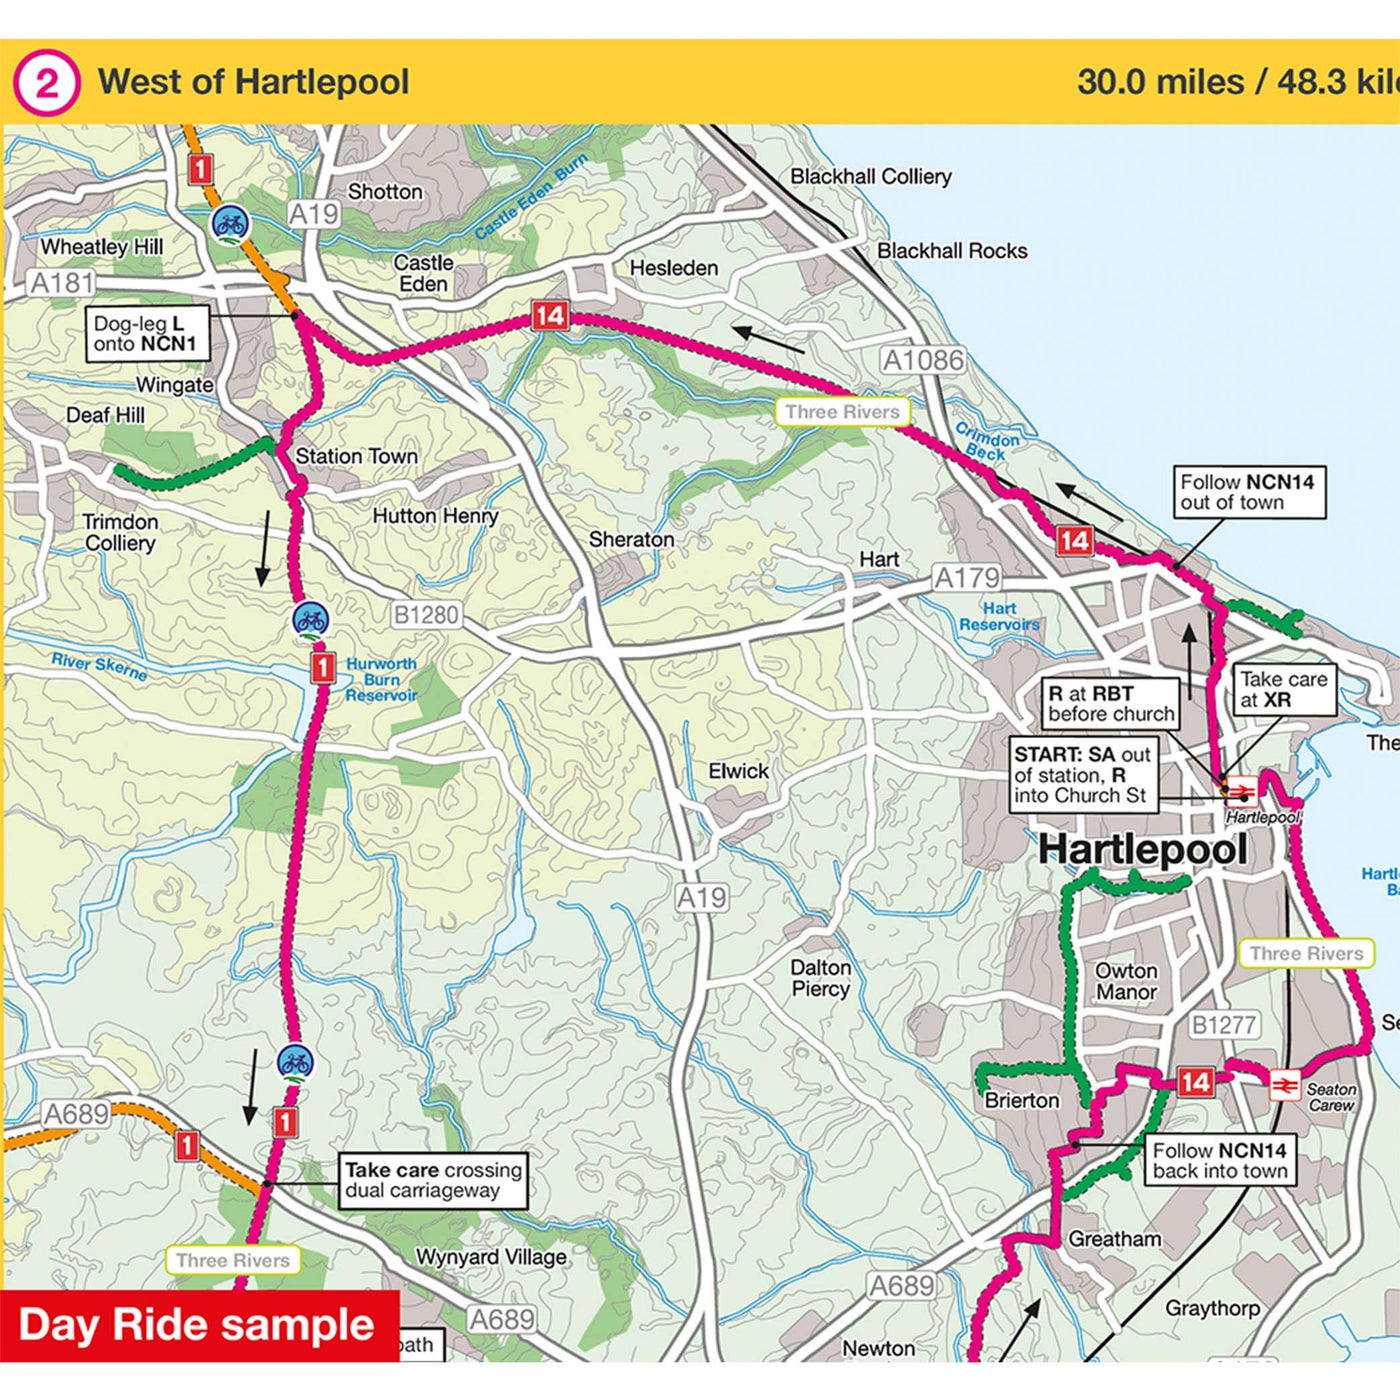 Day ride sample: West of Hartlepool, 30 miles